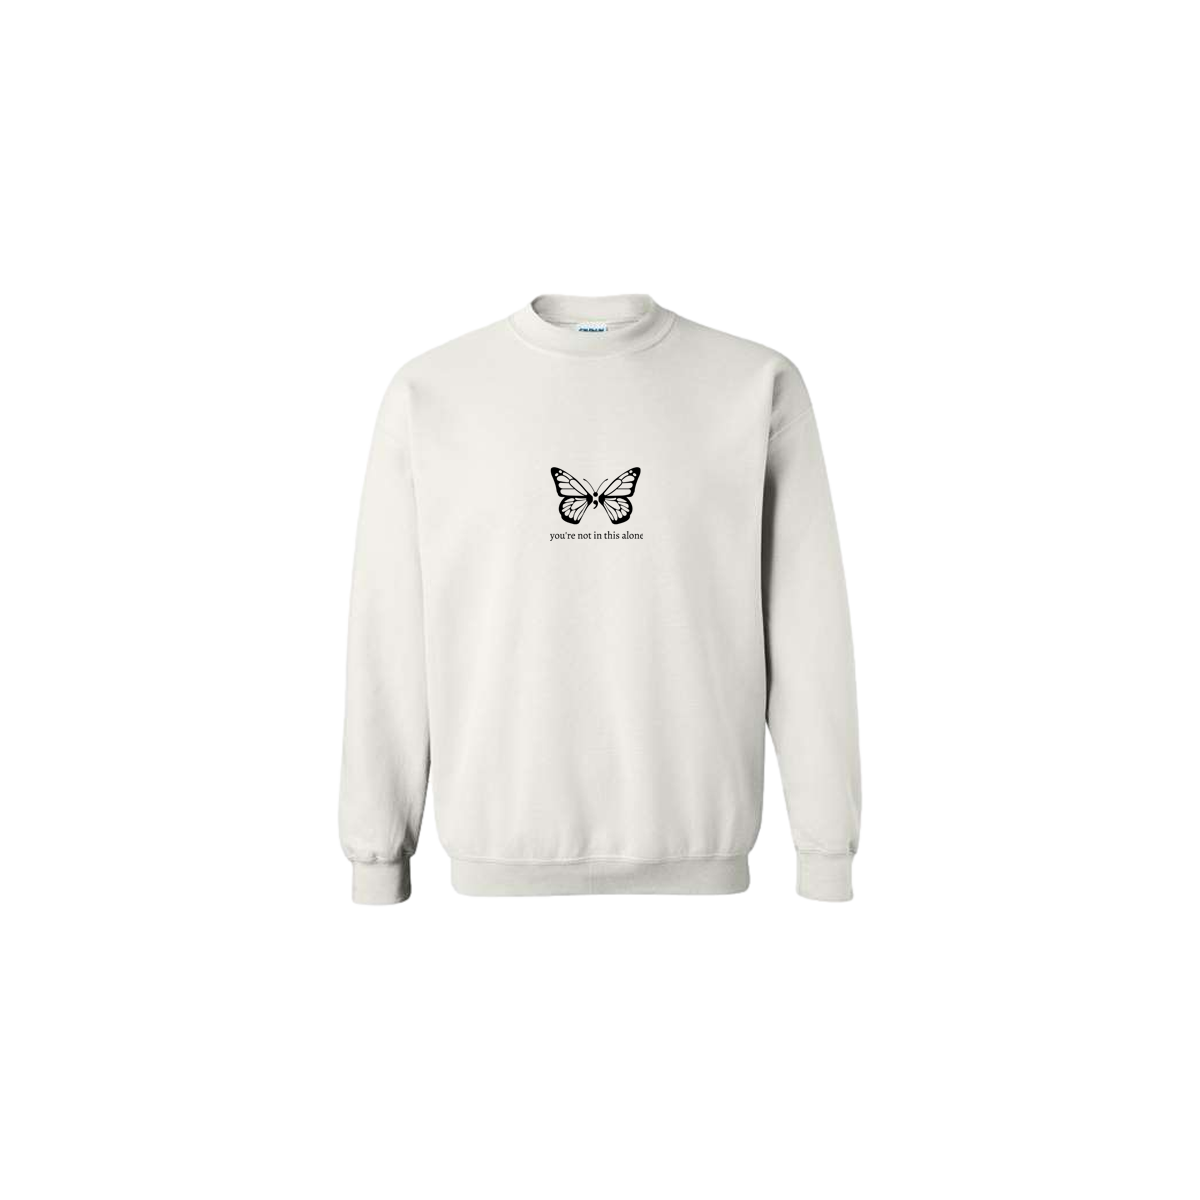 You're Not In This Alone Butterfly Embroidered White Crewneck - Mental Health Awareness Clothing